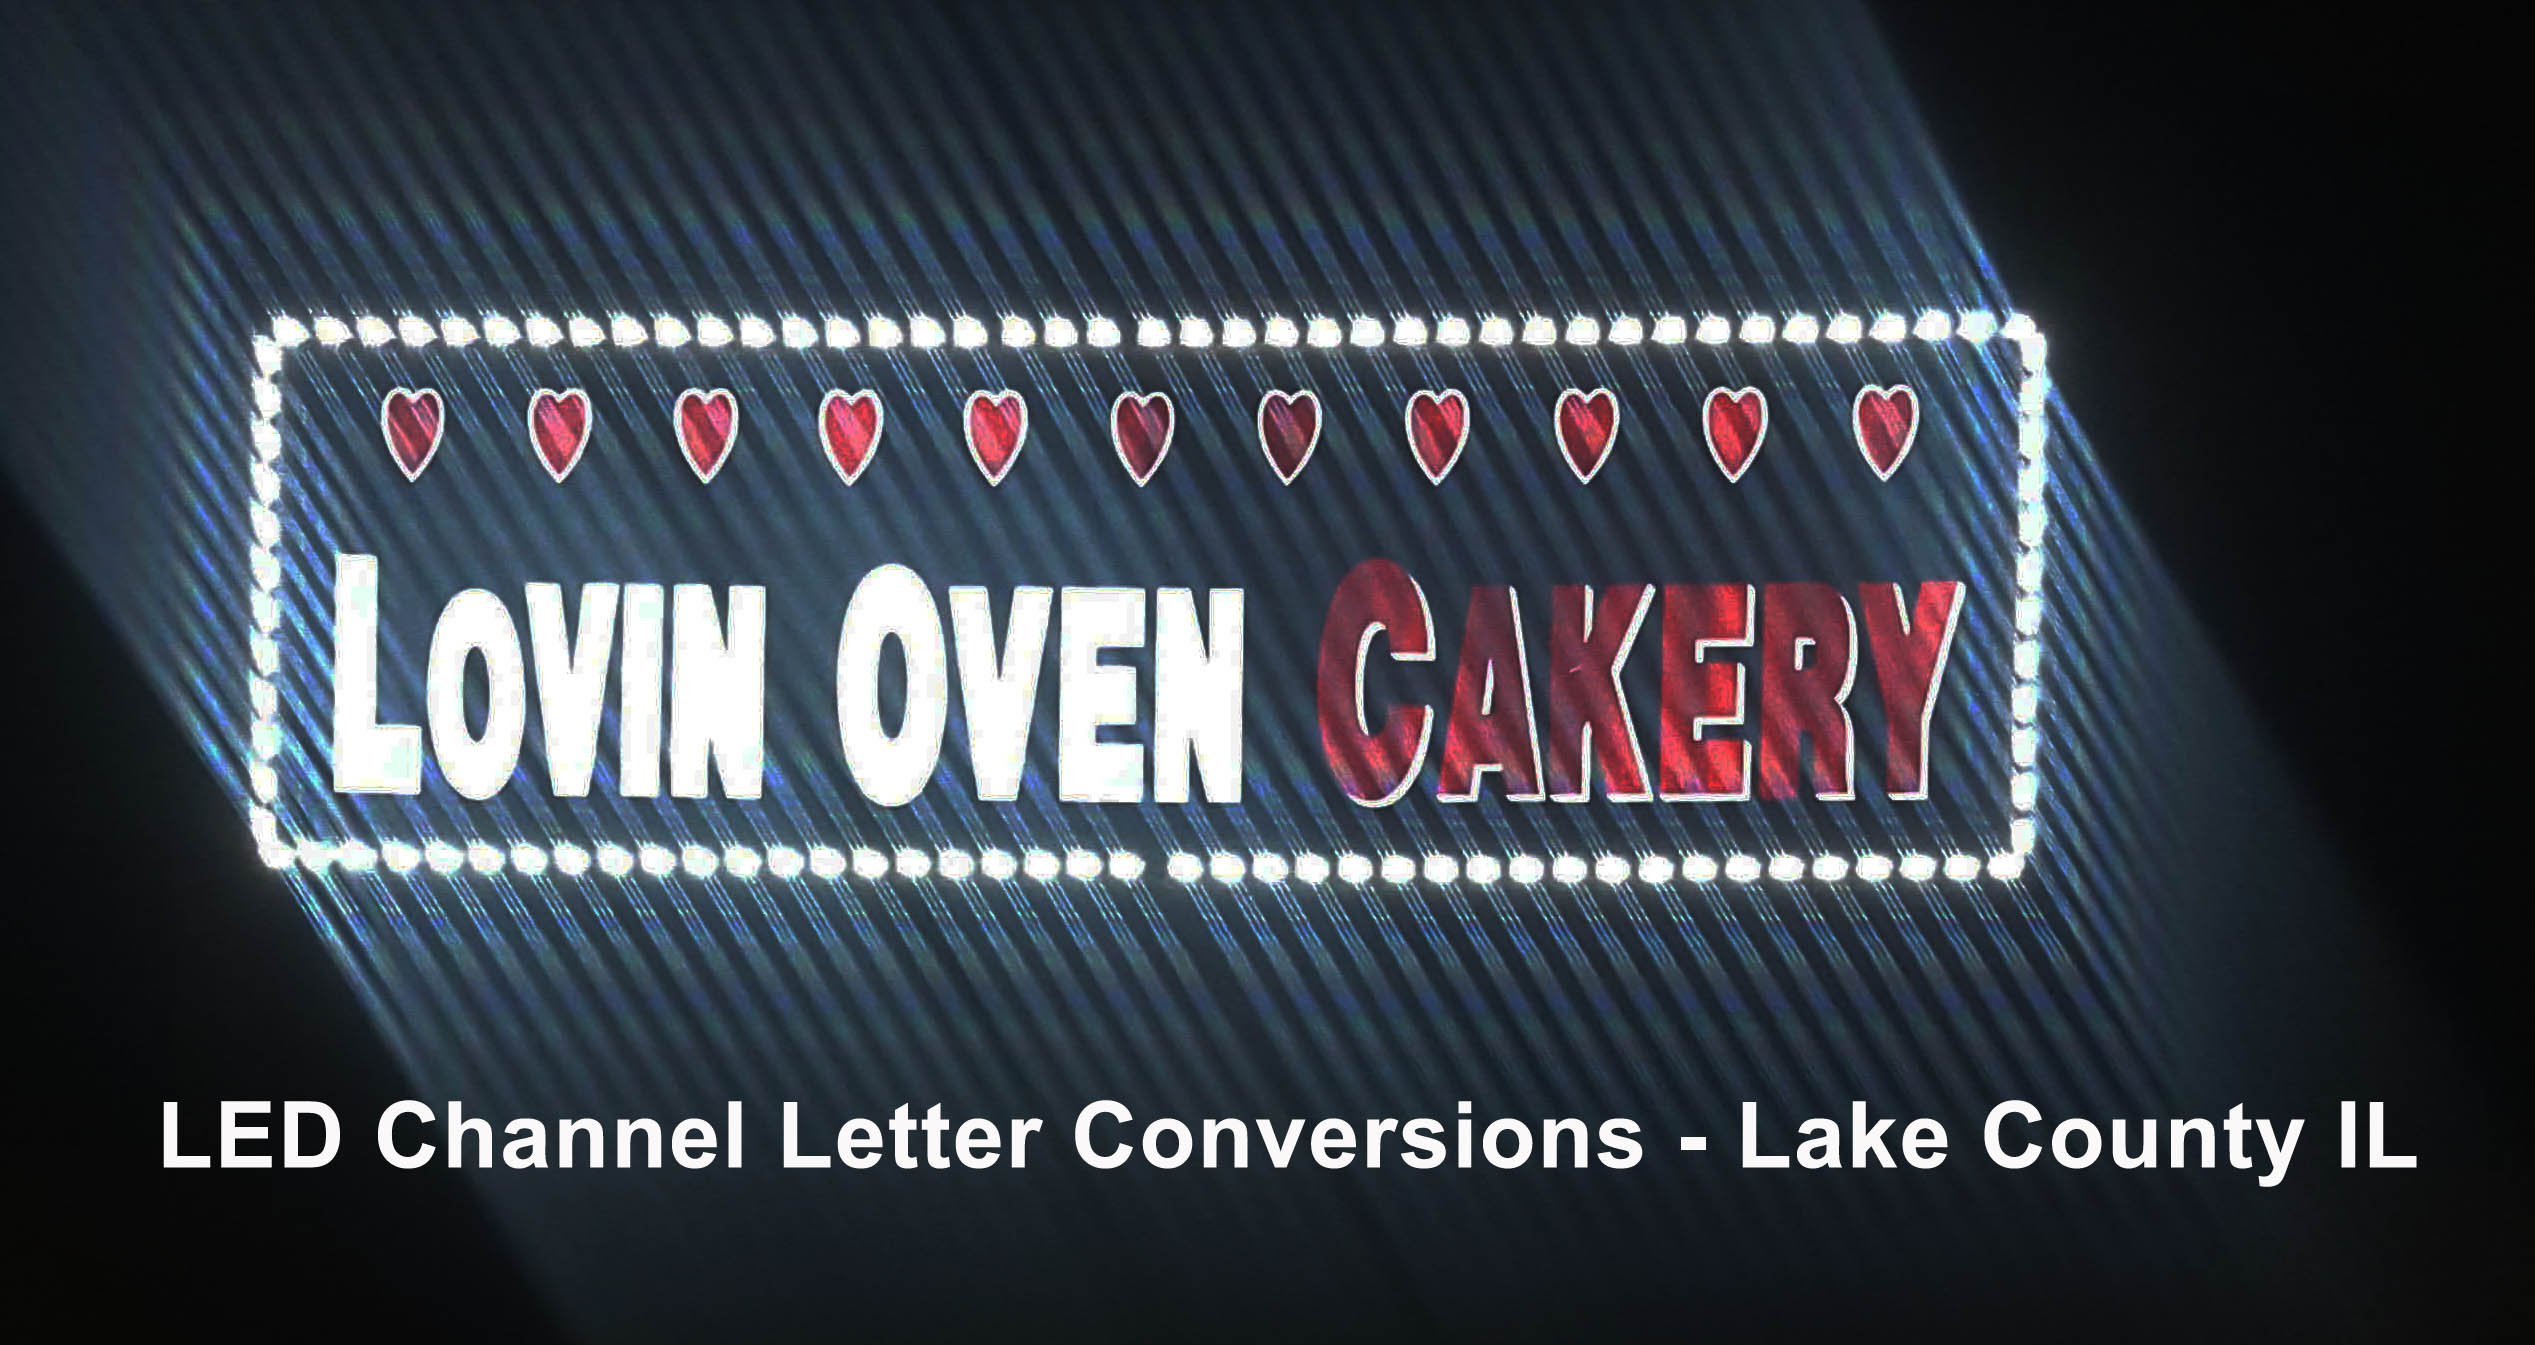 LED Channel Letter Conversions - Lake County IL